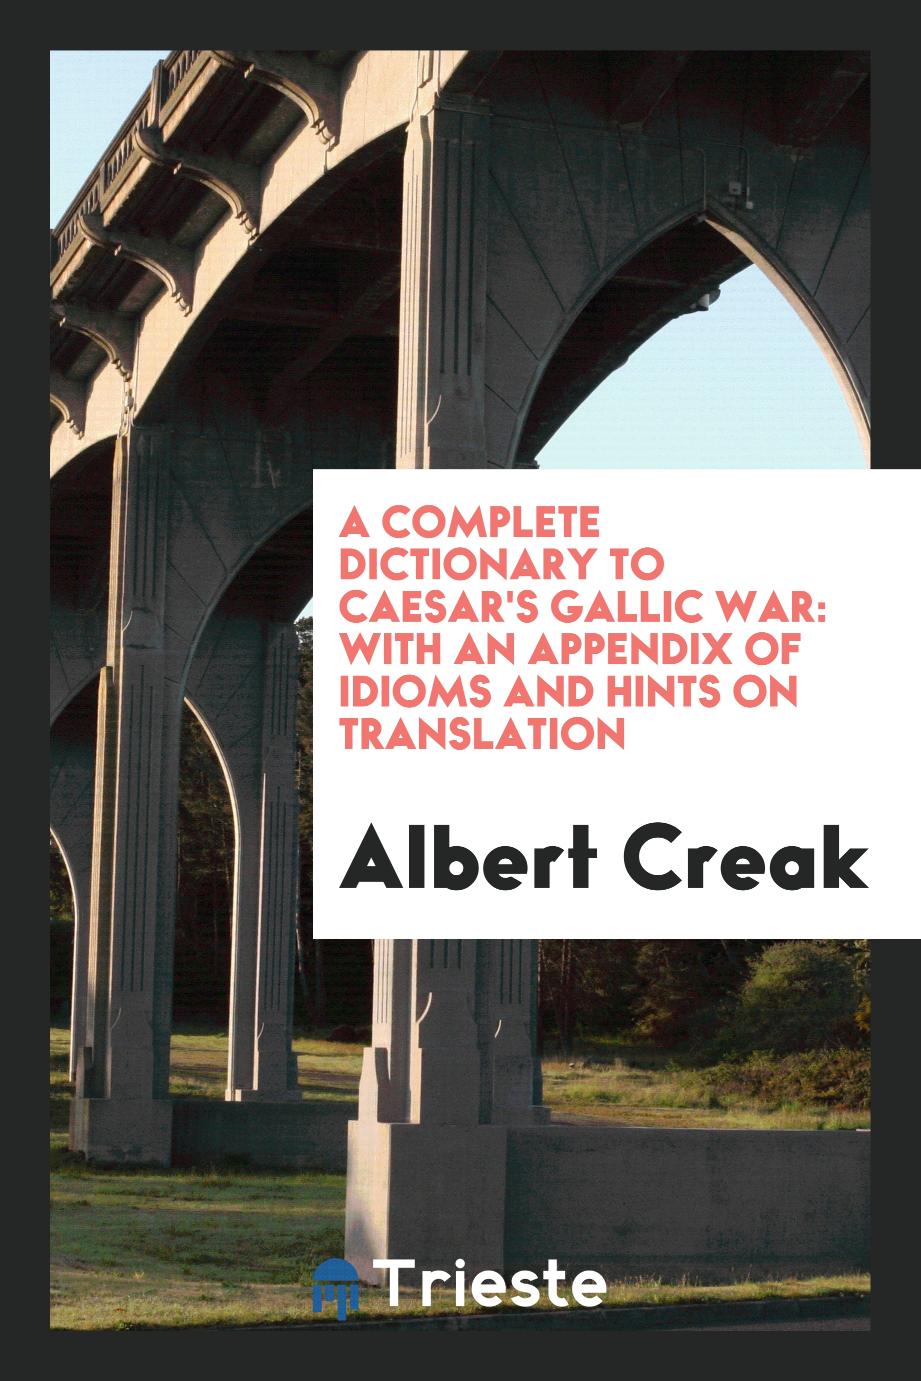 Albert Creak - A Complete Dictionary to Caesar's Gallic War: With an Appendix of Idioms and Hints on Translation